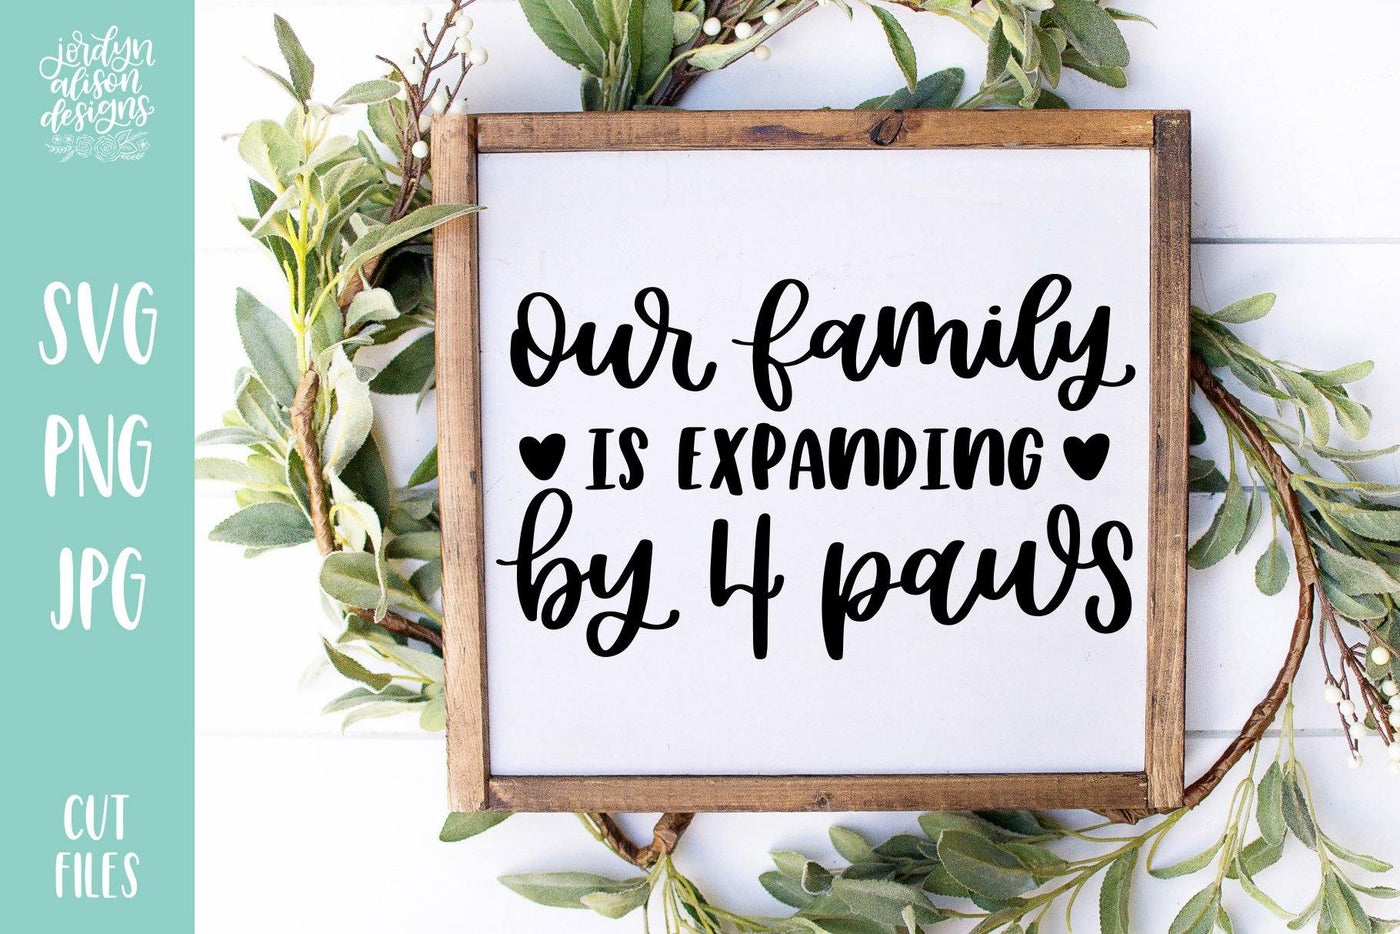 Cut File | Family is Expanding by Four Paws SVG - JordynAlisonDesigns